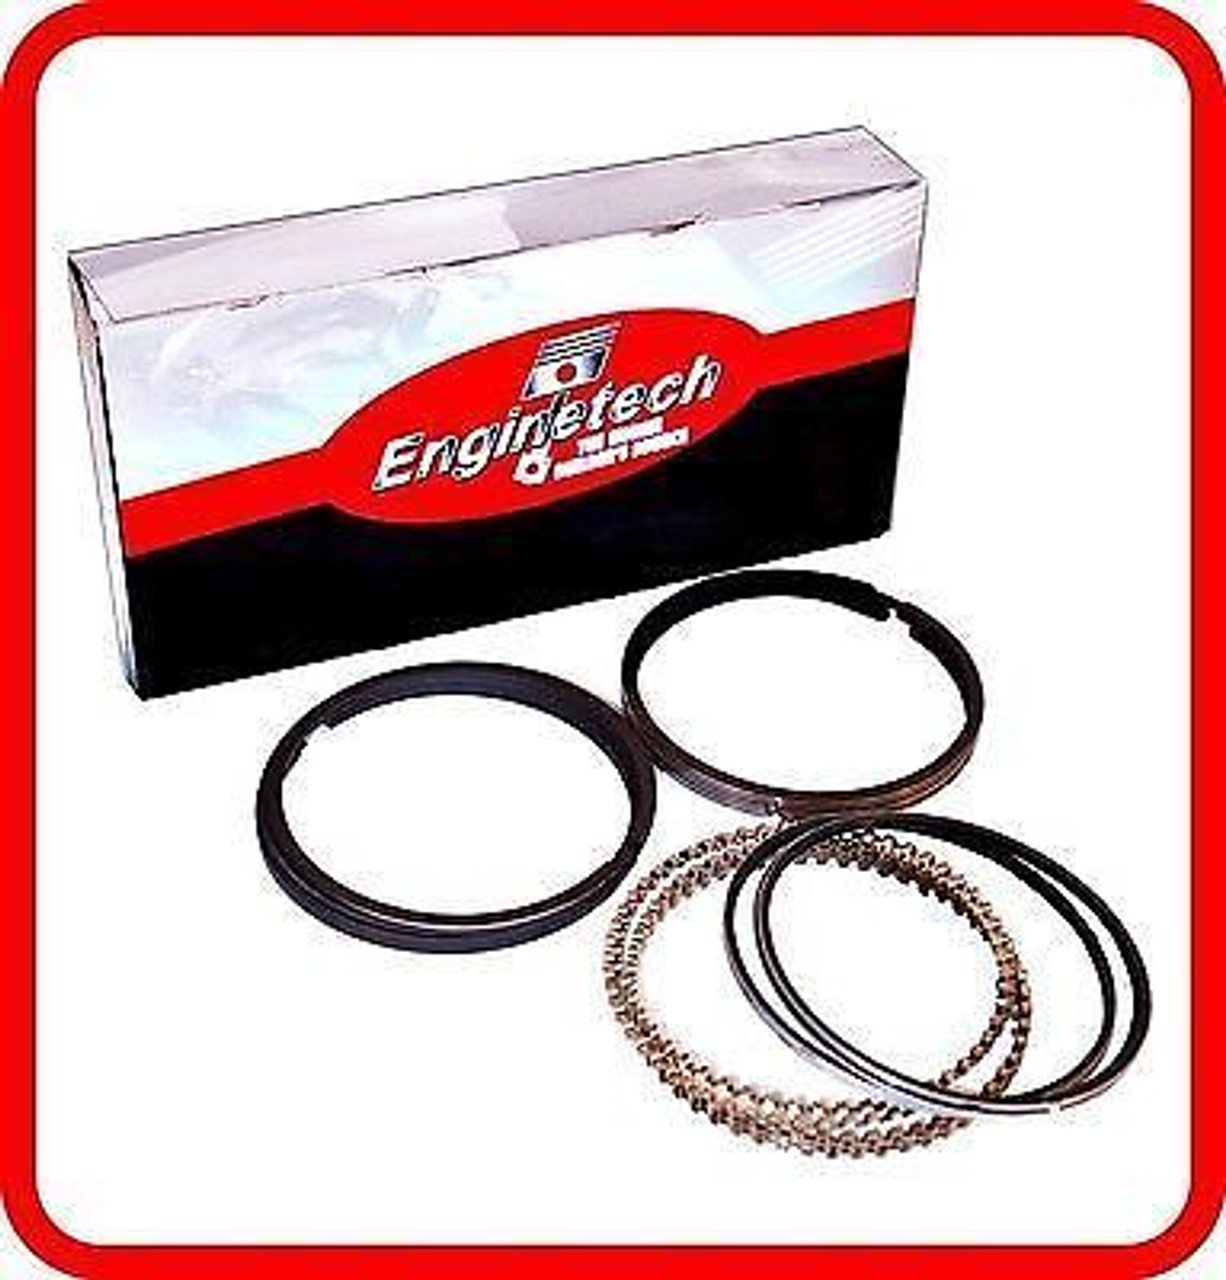 Piston Ring Set - 2007 Ford Expedition 5.4L (S90228.L1064)